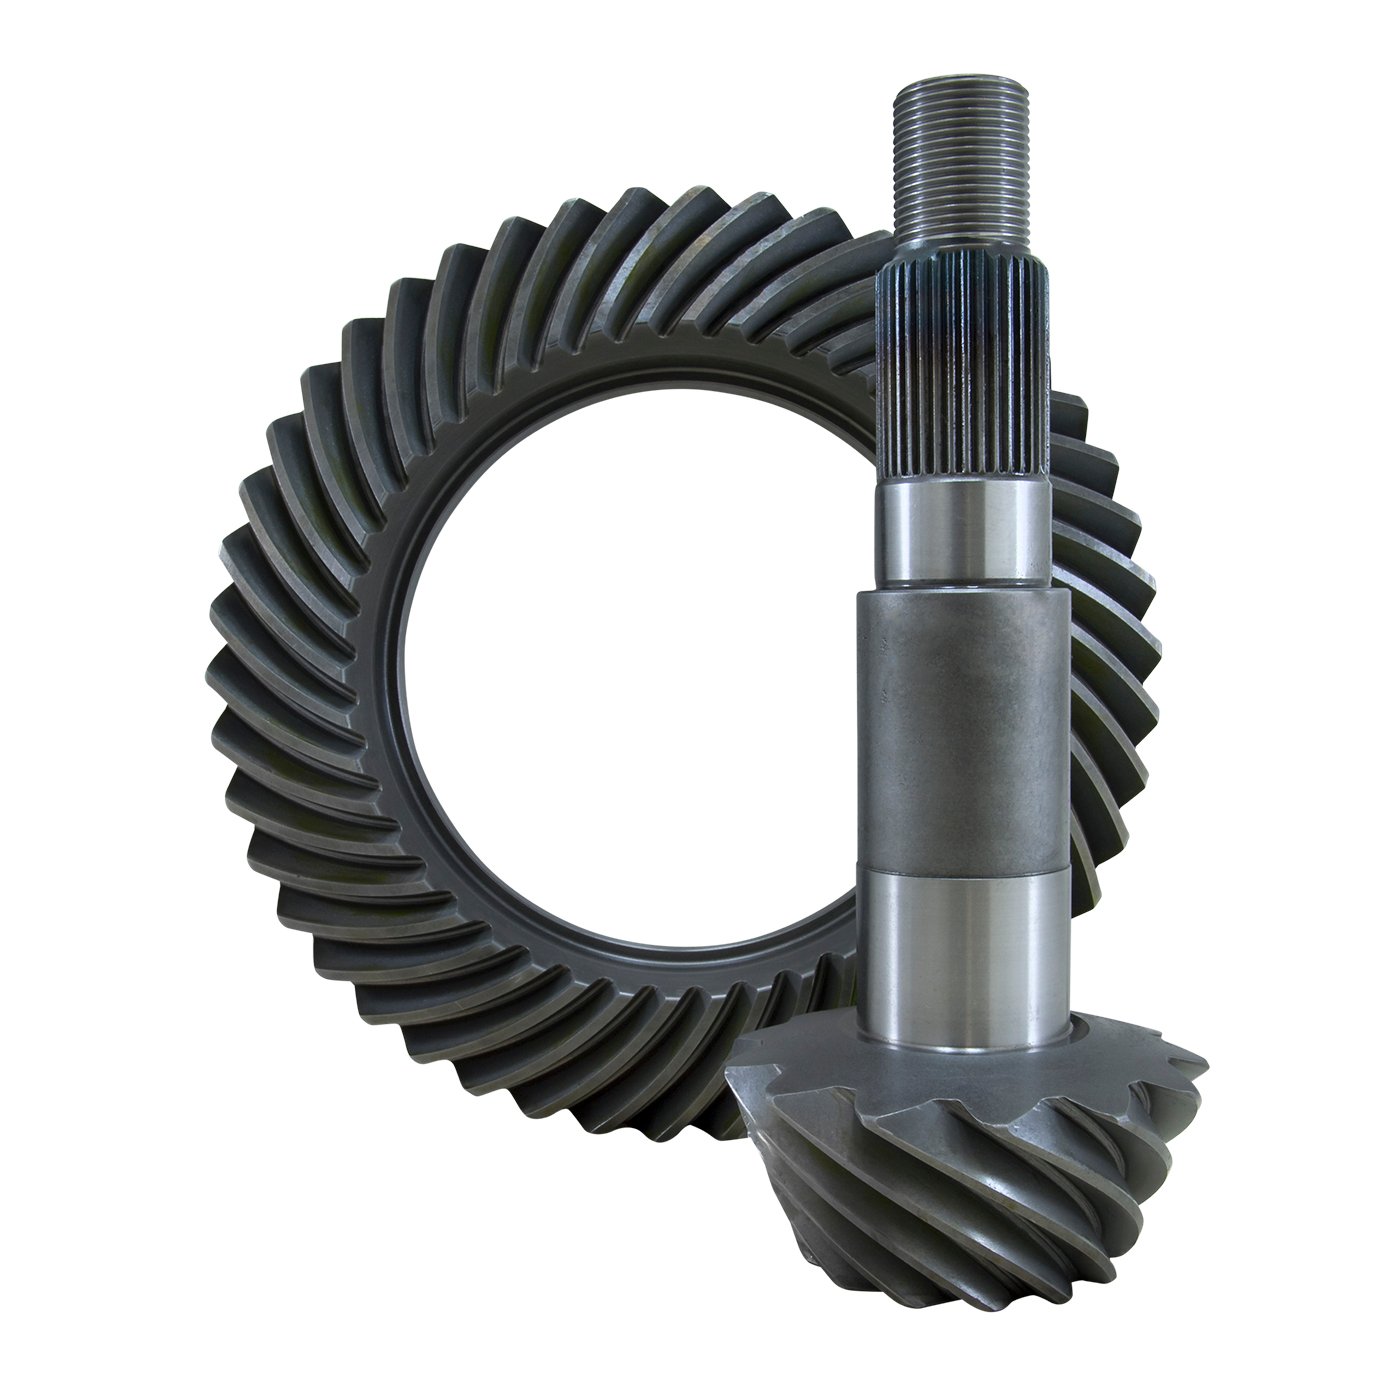 USA Standard ZG D80-538 Replacement Ring & Pinion Gear Set, For Dana 80, 5.38 Ratio.